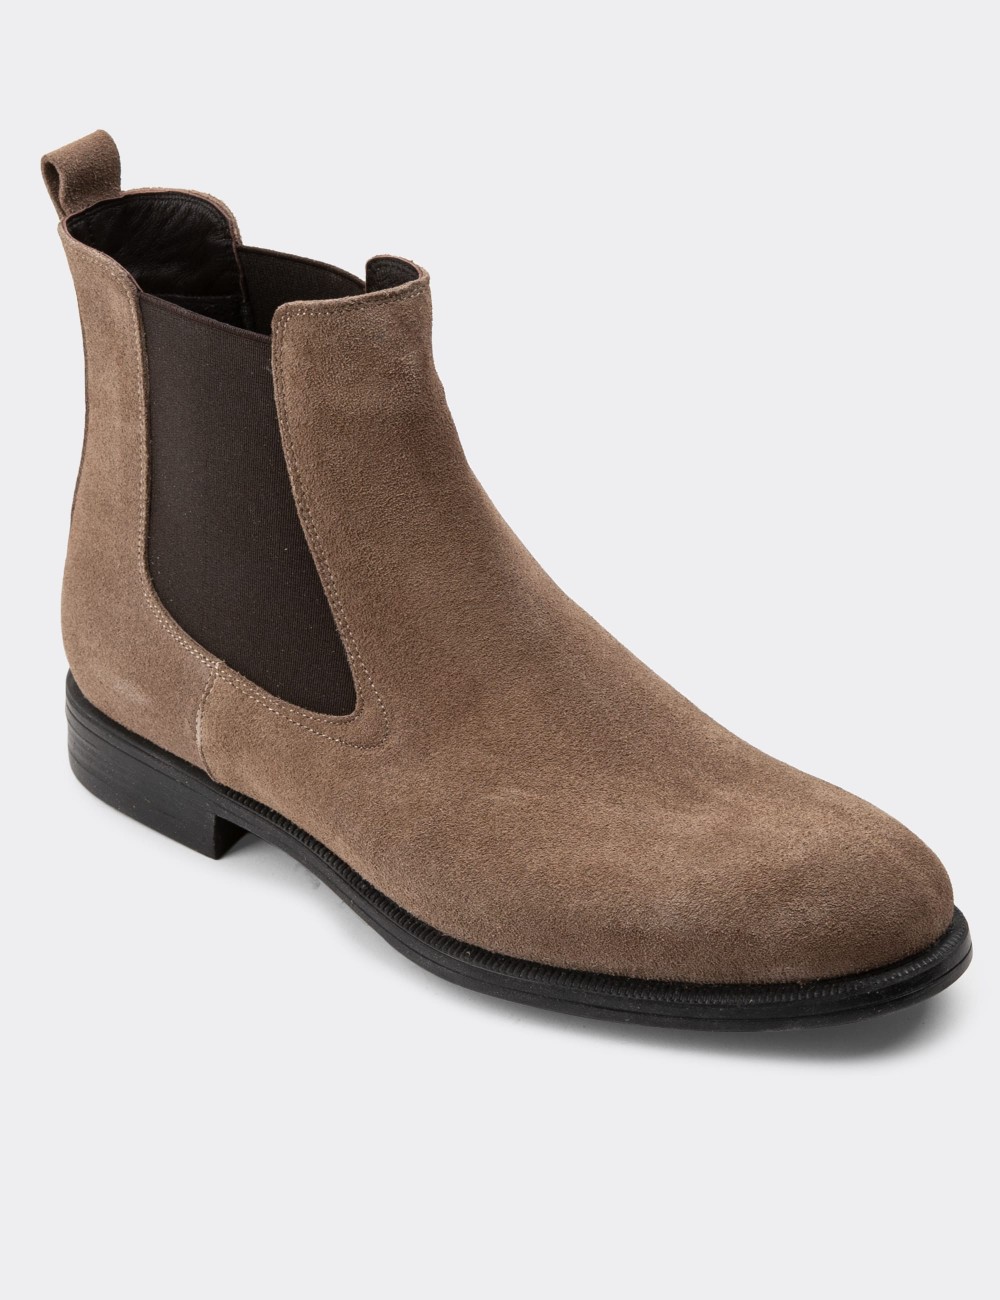 Sandstone Suede Leather Boots - 01919MVZNC01